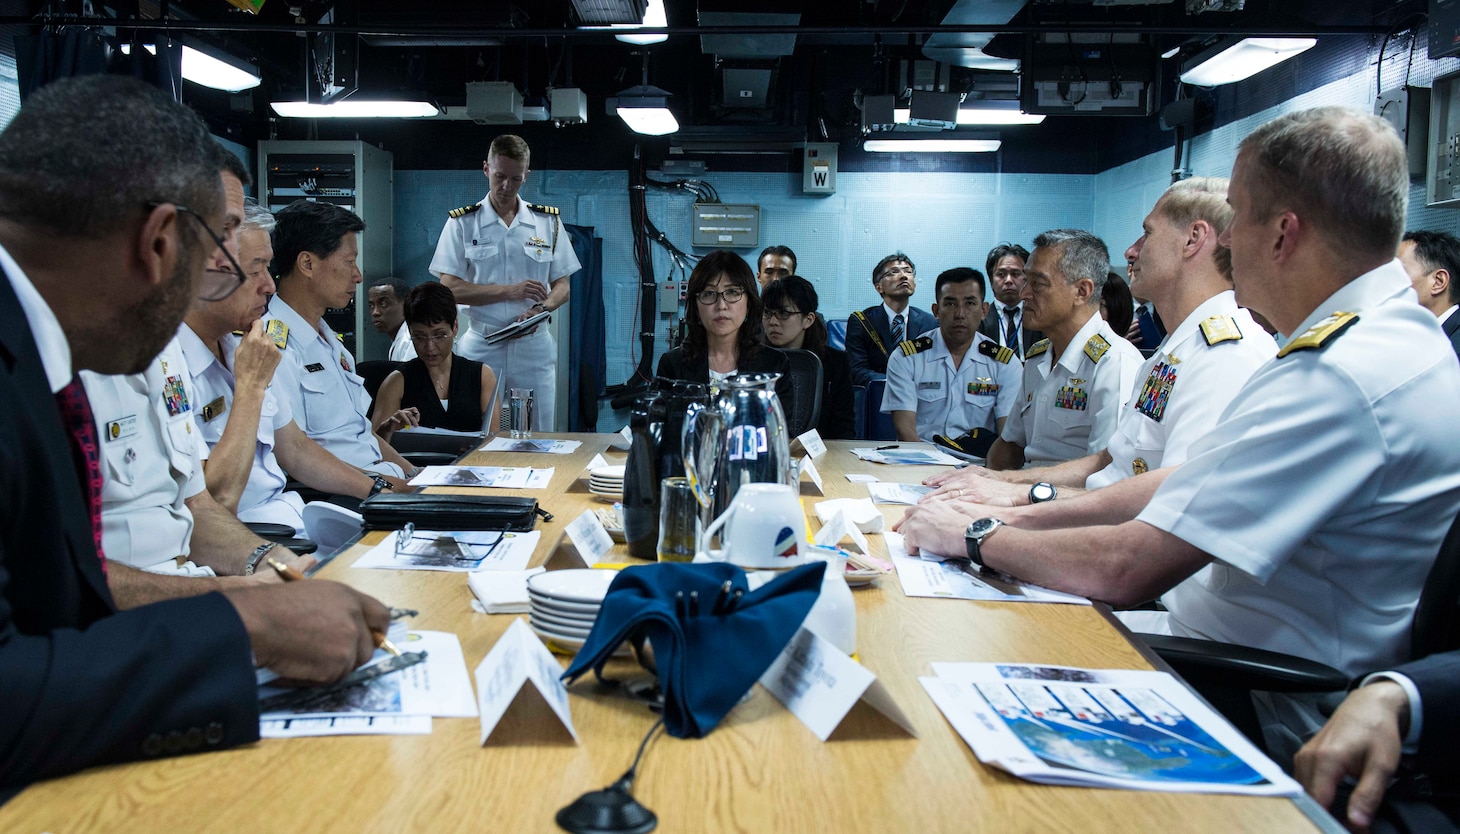 YOKOSUKA, Japan (Aug. 23, 2016) Japanese Minister of Defense, Tomomi Inada, and her accompanying group, receive a brief about the mission of forward-deployed naval forces during a tour of the U.S. Navy’s only forward-deployed aircraft carrier, USS Ronald Reagan (CVN 76). Ronald Reagan is forward deployed to Japan in support of security and stability in the Indo-Asia-Pacific. (U.S. Navy photo by Mass Communication Specialist 2nd Class Adrienne Powers/ Released)